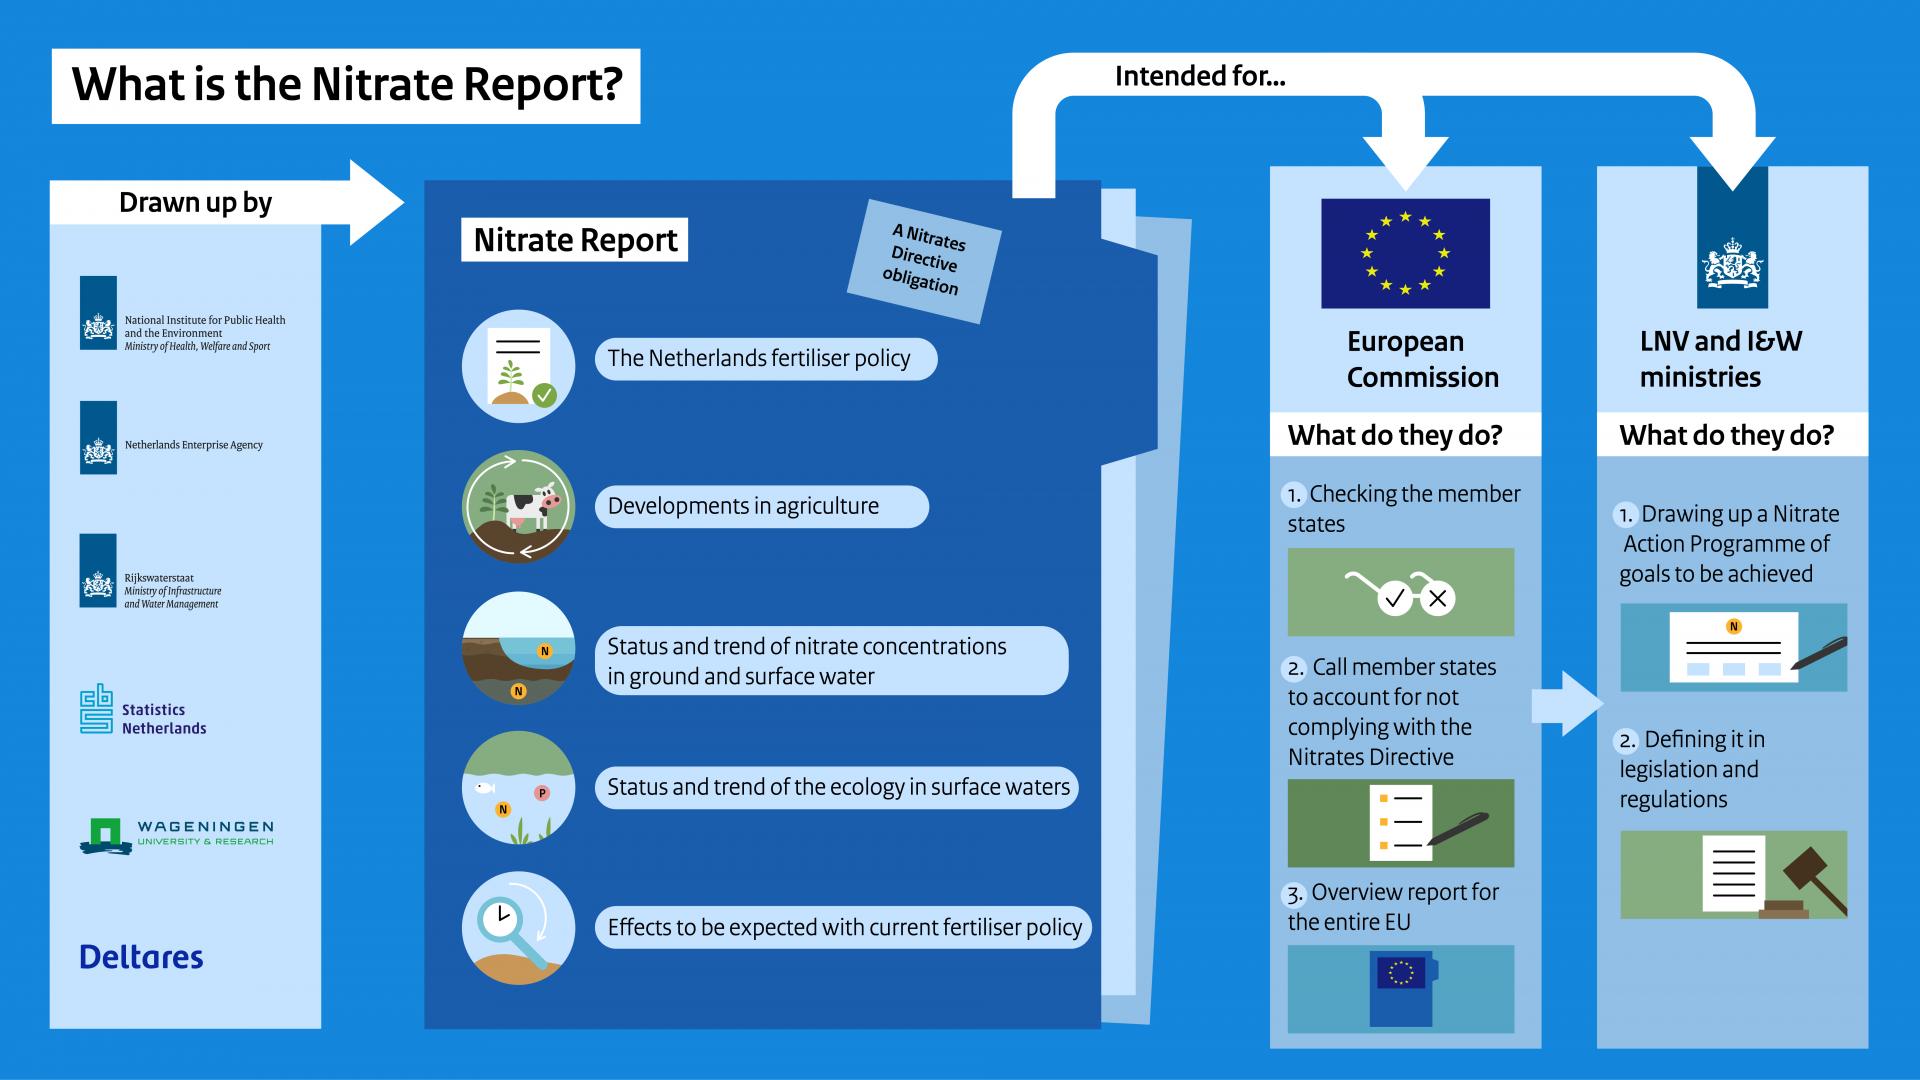 The Nitrate report is meant for the European Commission and Dutch Ministries of Agriculture and Economy